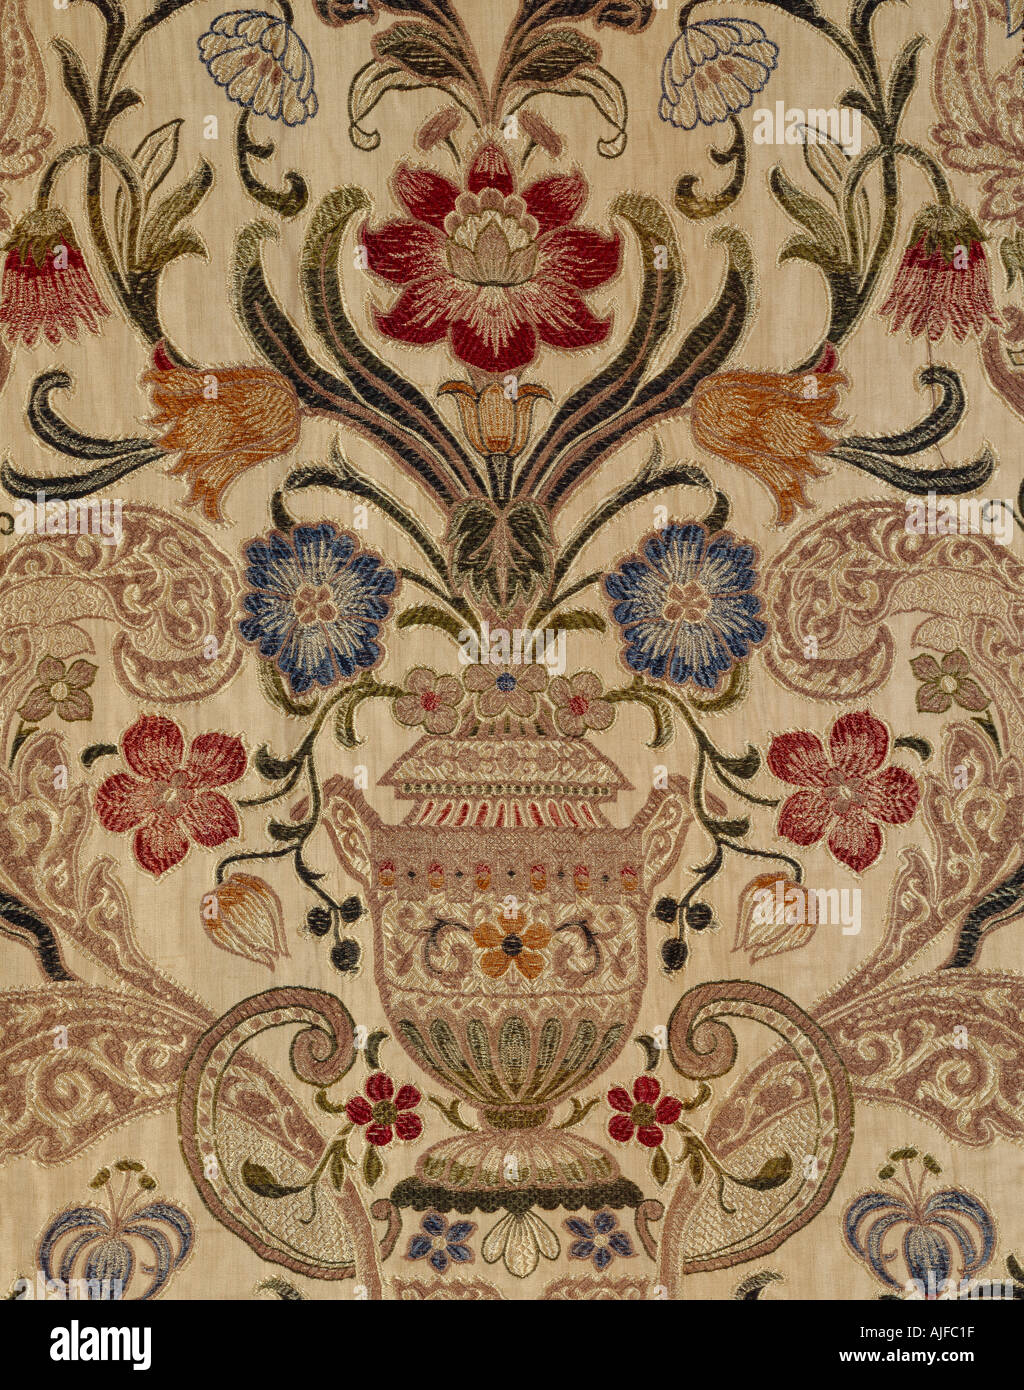 The floral design on the brocaded bed hangings in the Gallery Bedroom at Powis Castle Gwynedd Wales Stock Photo